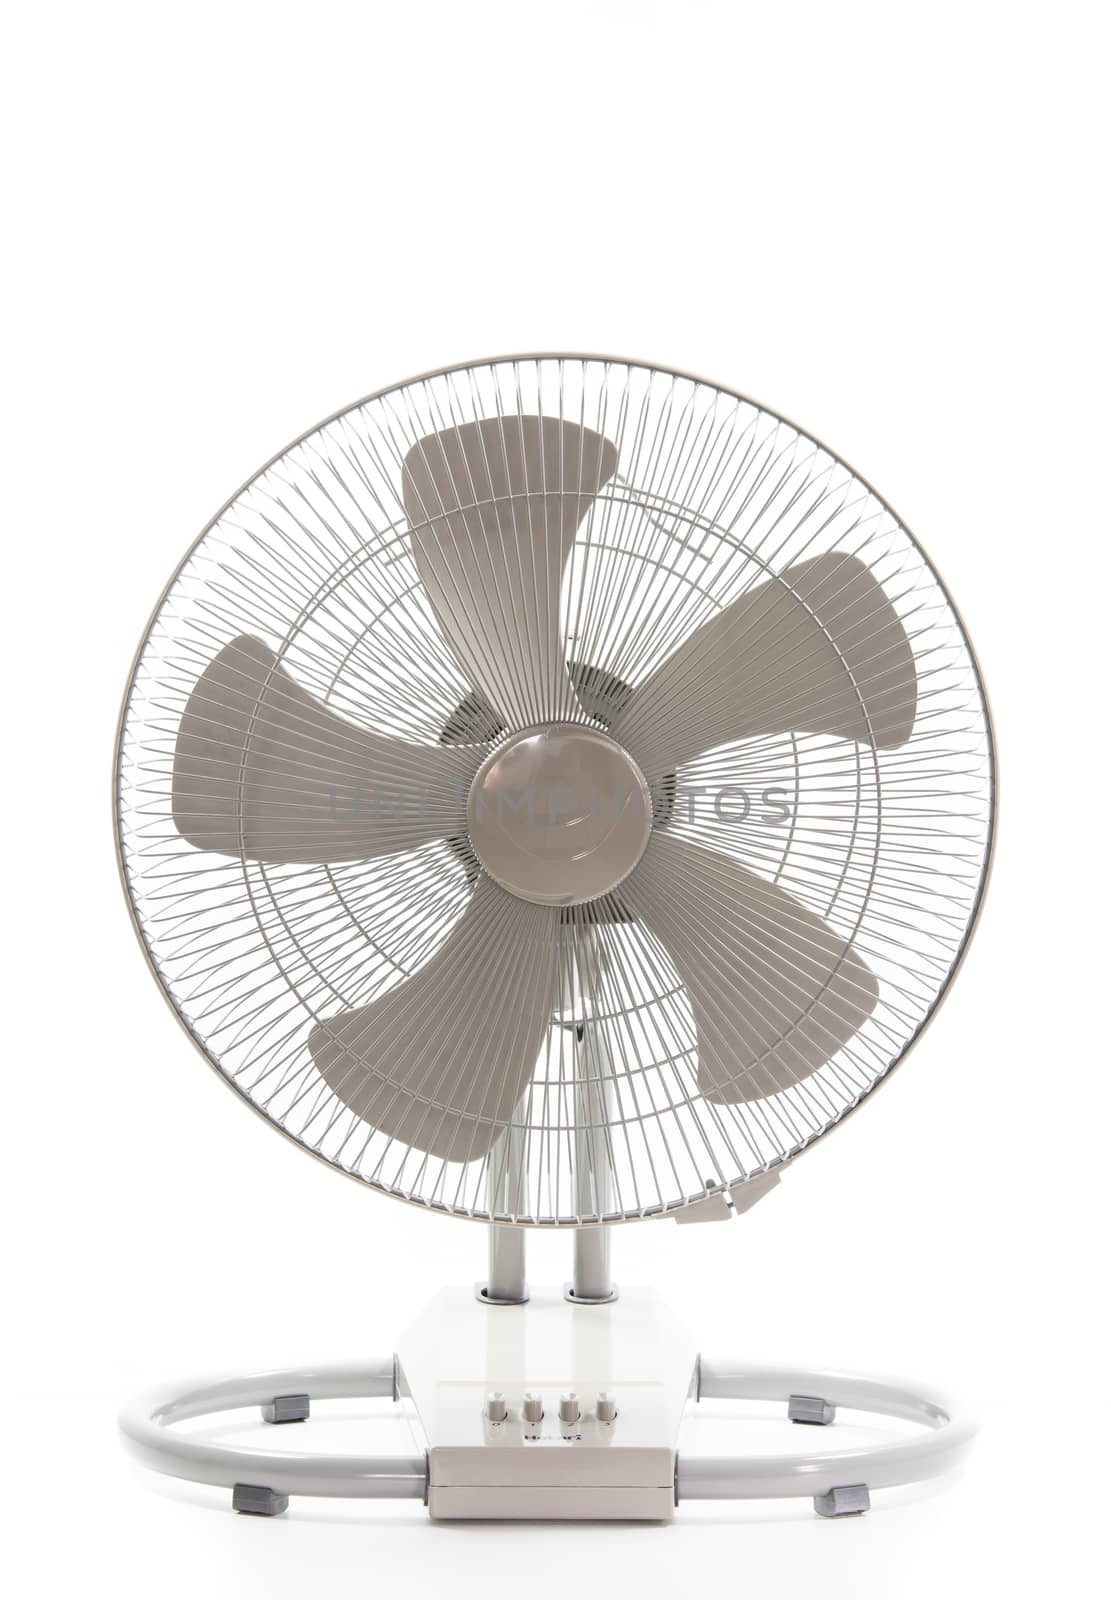 industry metal fan isolate on over white background